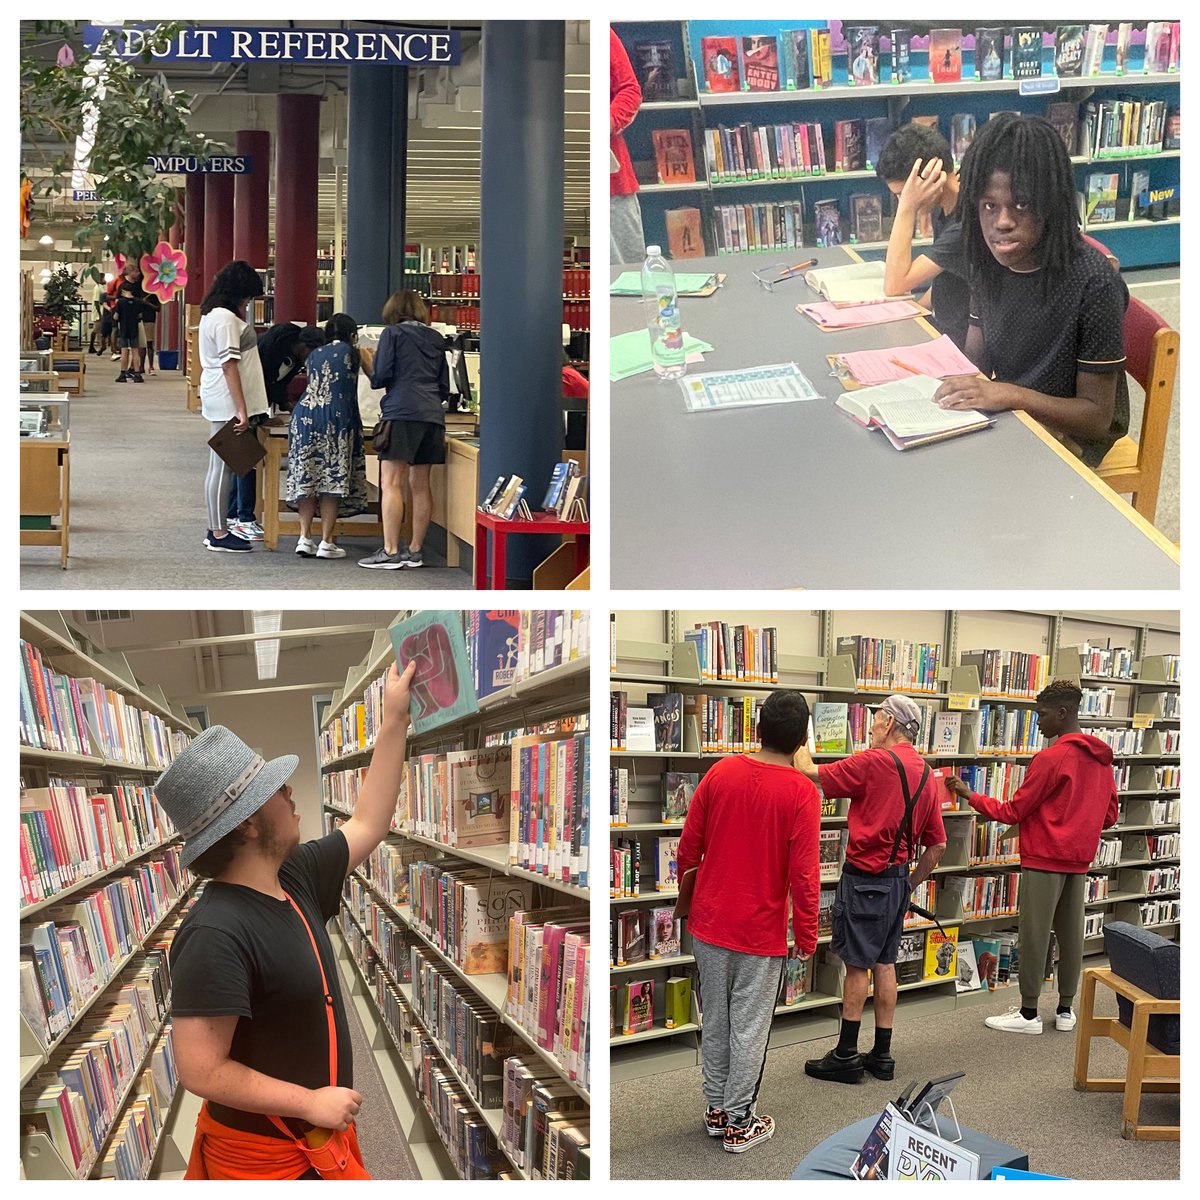 Going to the Lawrence Library is always one of my favorite CBI trips! The students and staff had a great time! 📚@mclsnj @dadamltps @Mrs_Sasse_LTPS @LTPS1 @robyn_klim @CardinalsLHS